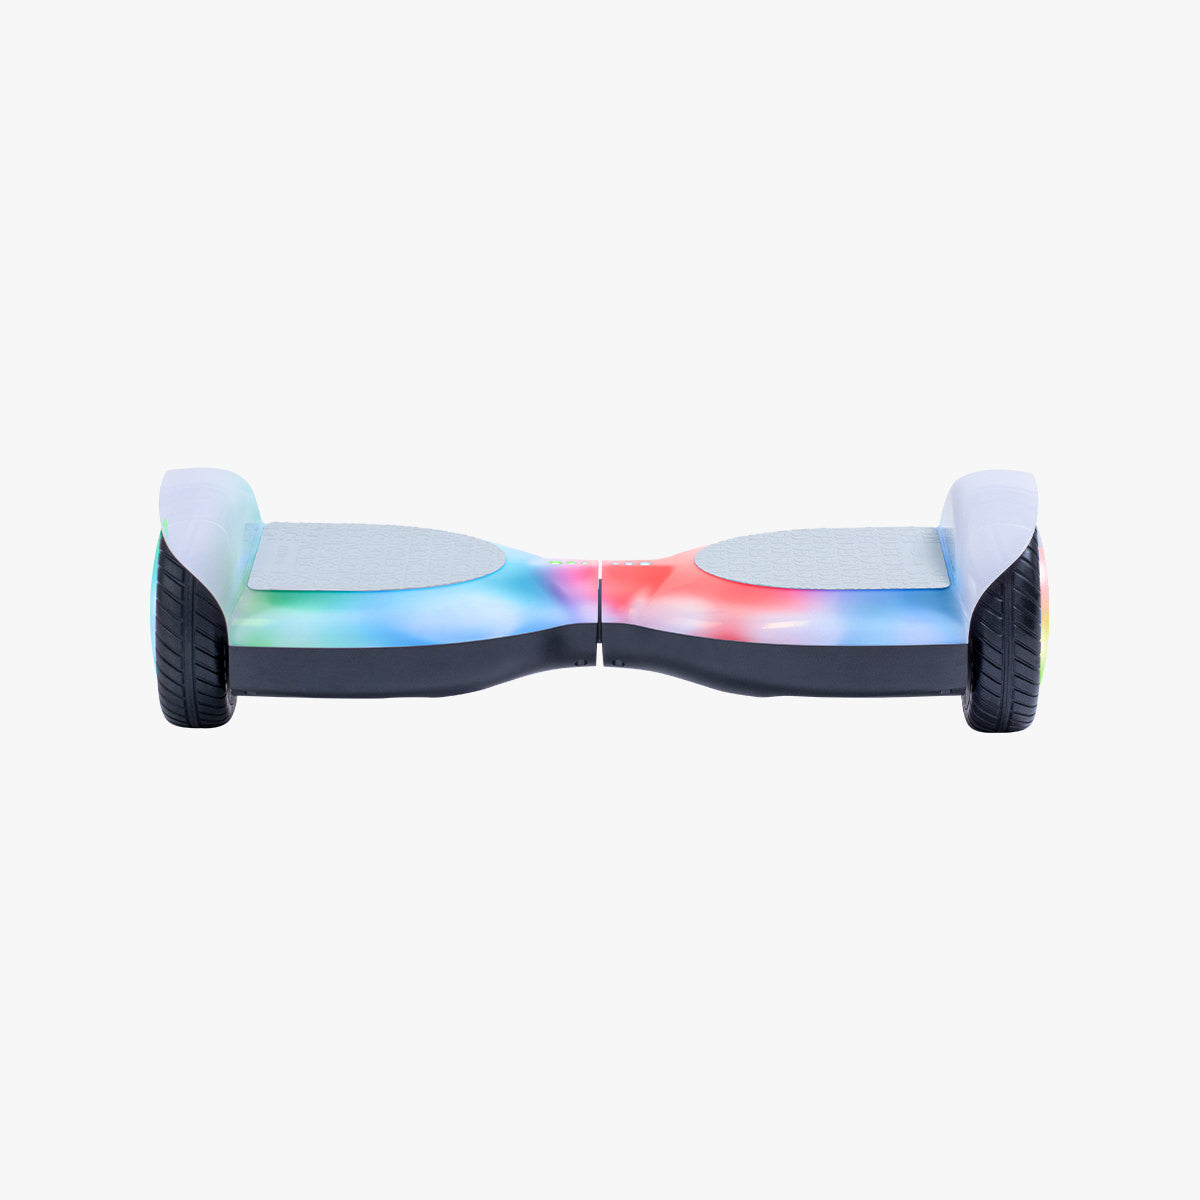 another front view of the Plasma X hoverboard